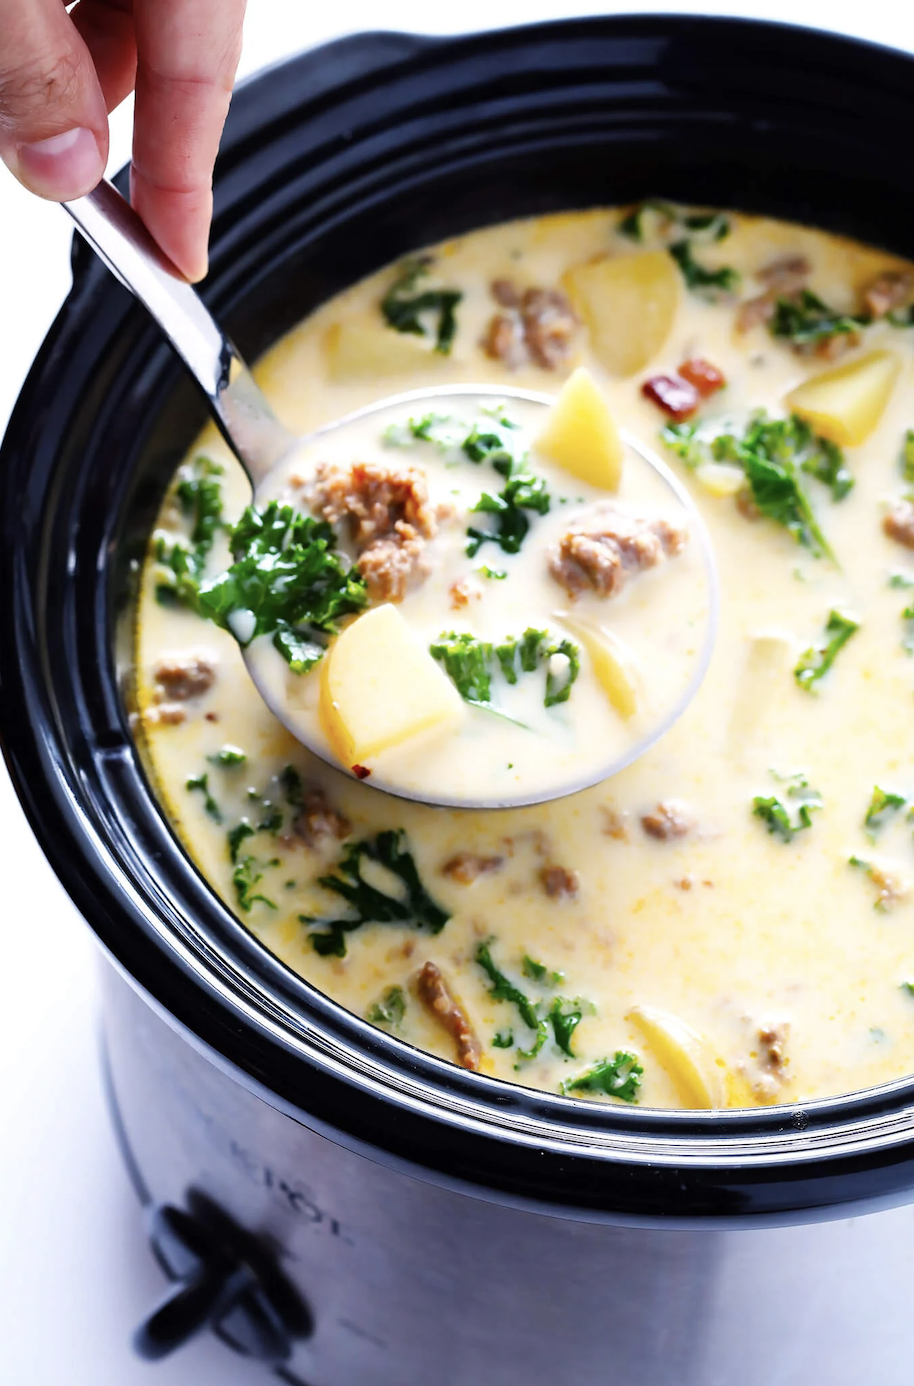 Hand serving soup from a crockpot with sausage, potatoes, and kale